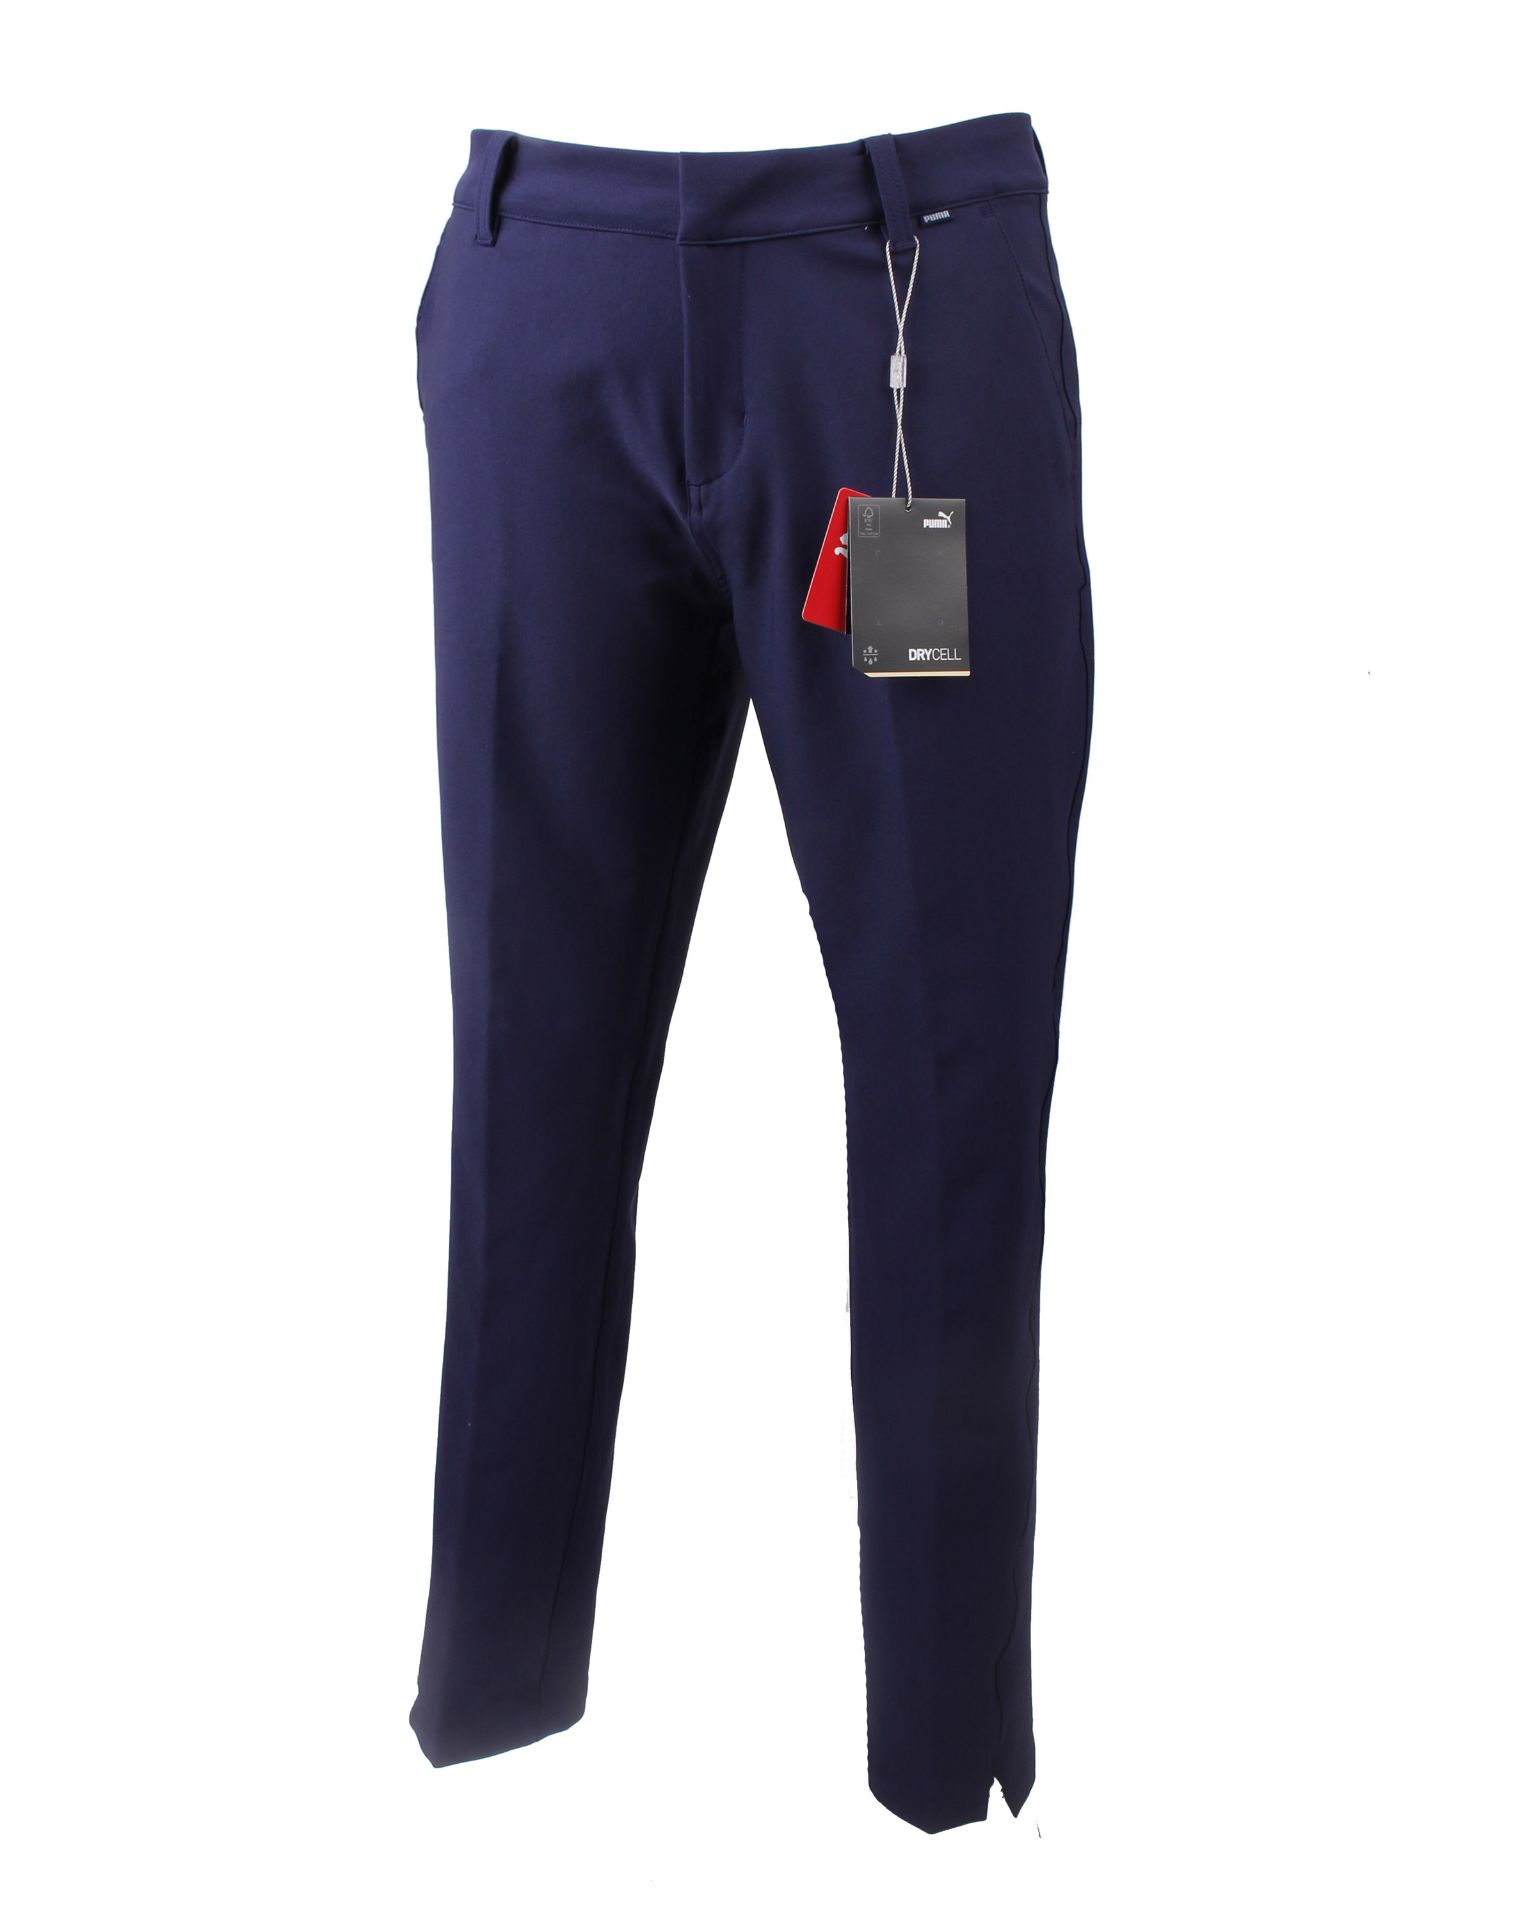 Seven pairs of men's as new Puma DryCell golf trousers in peacoat (Three EU L, two EU XL and two